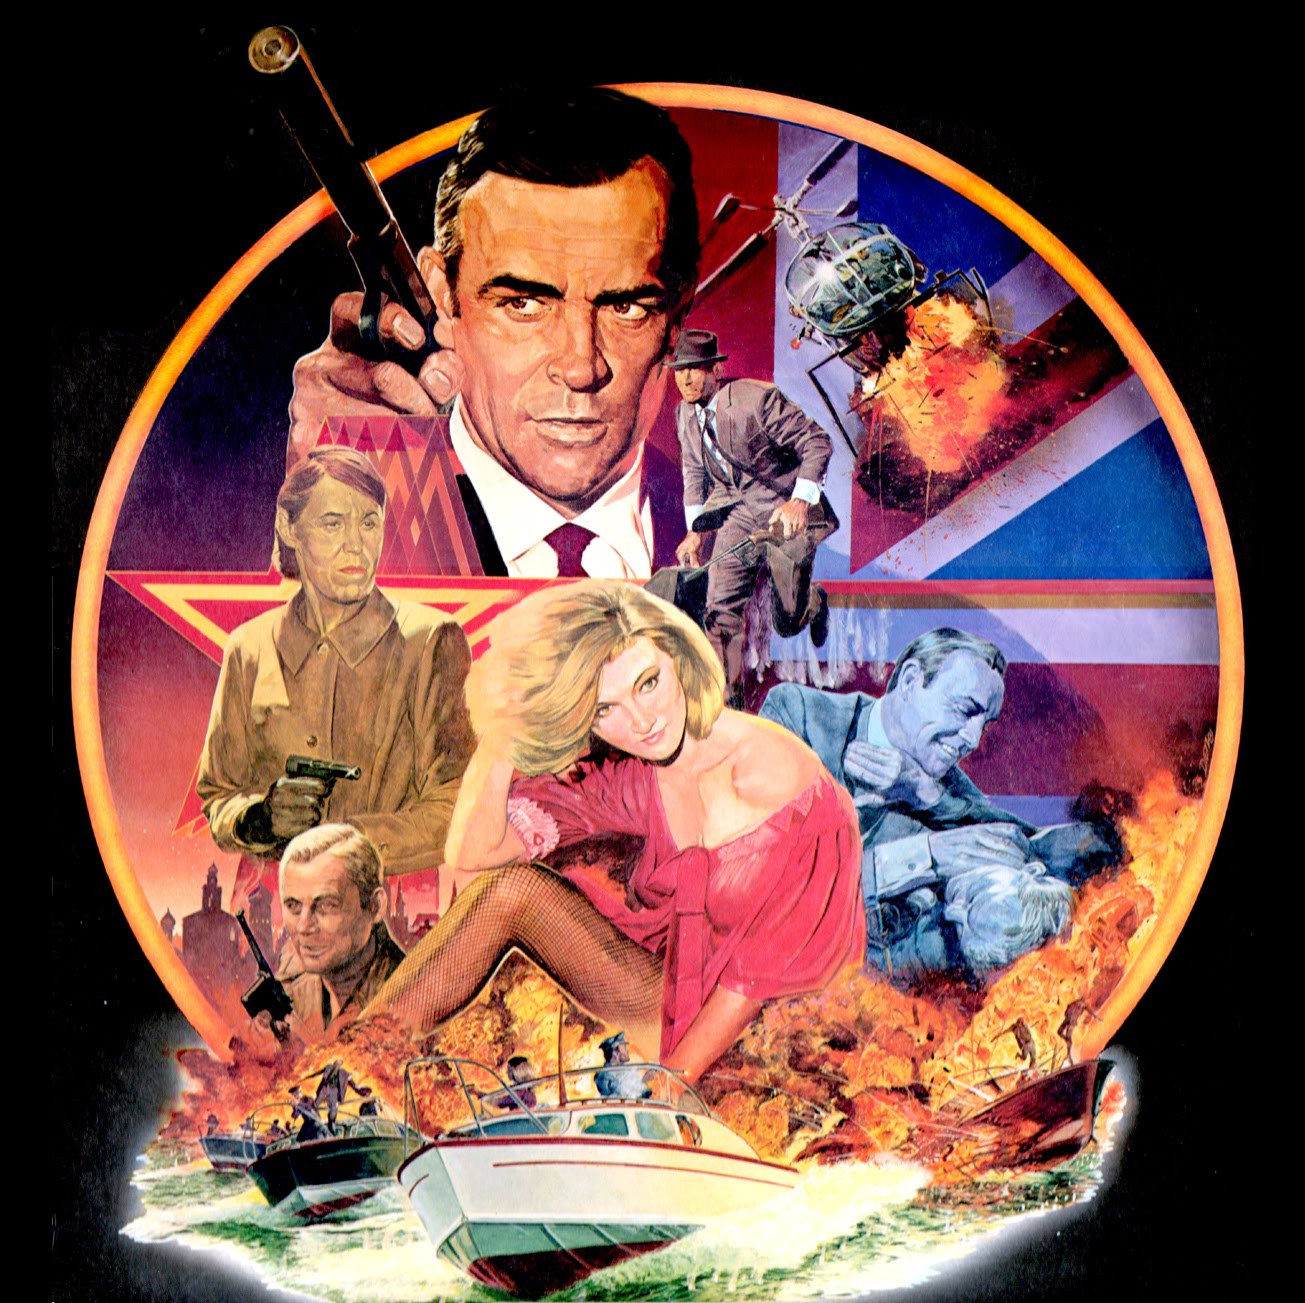 Illustrated 007 - The Art of James Bond: March 20121305 x 1303